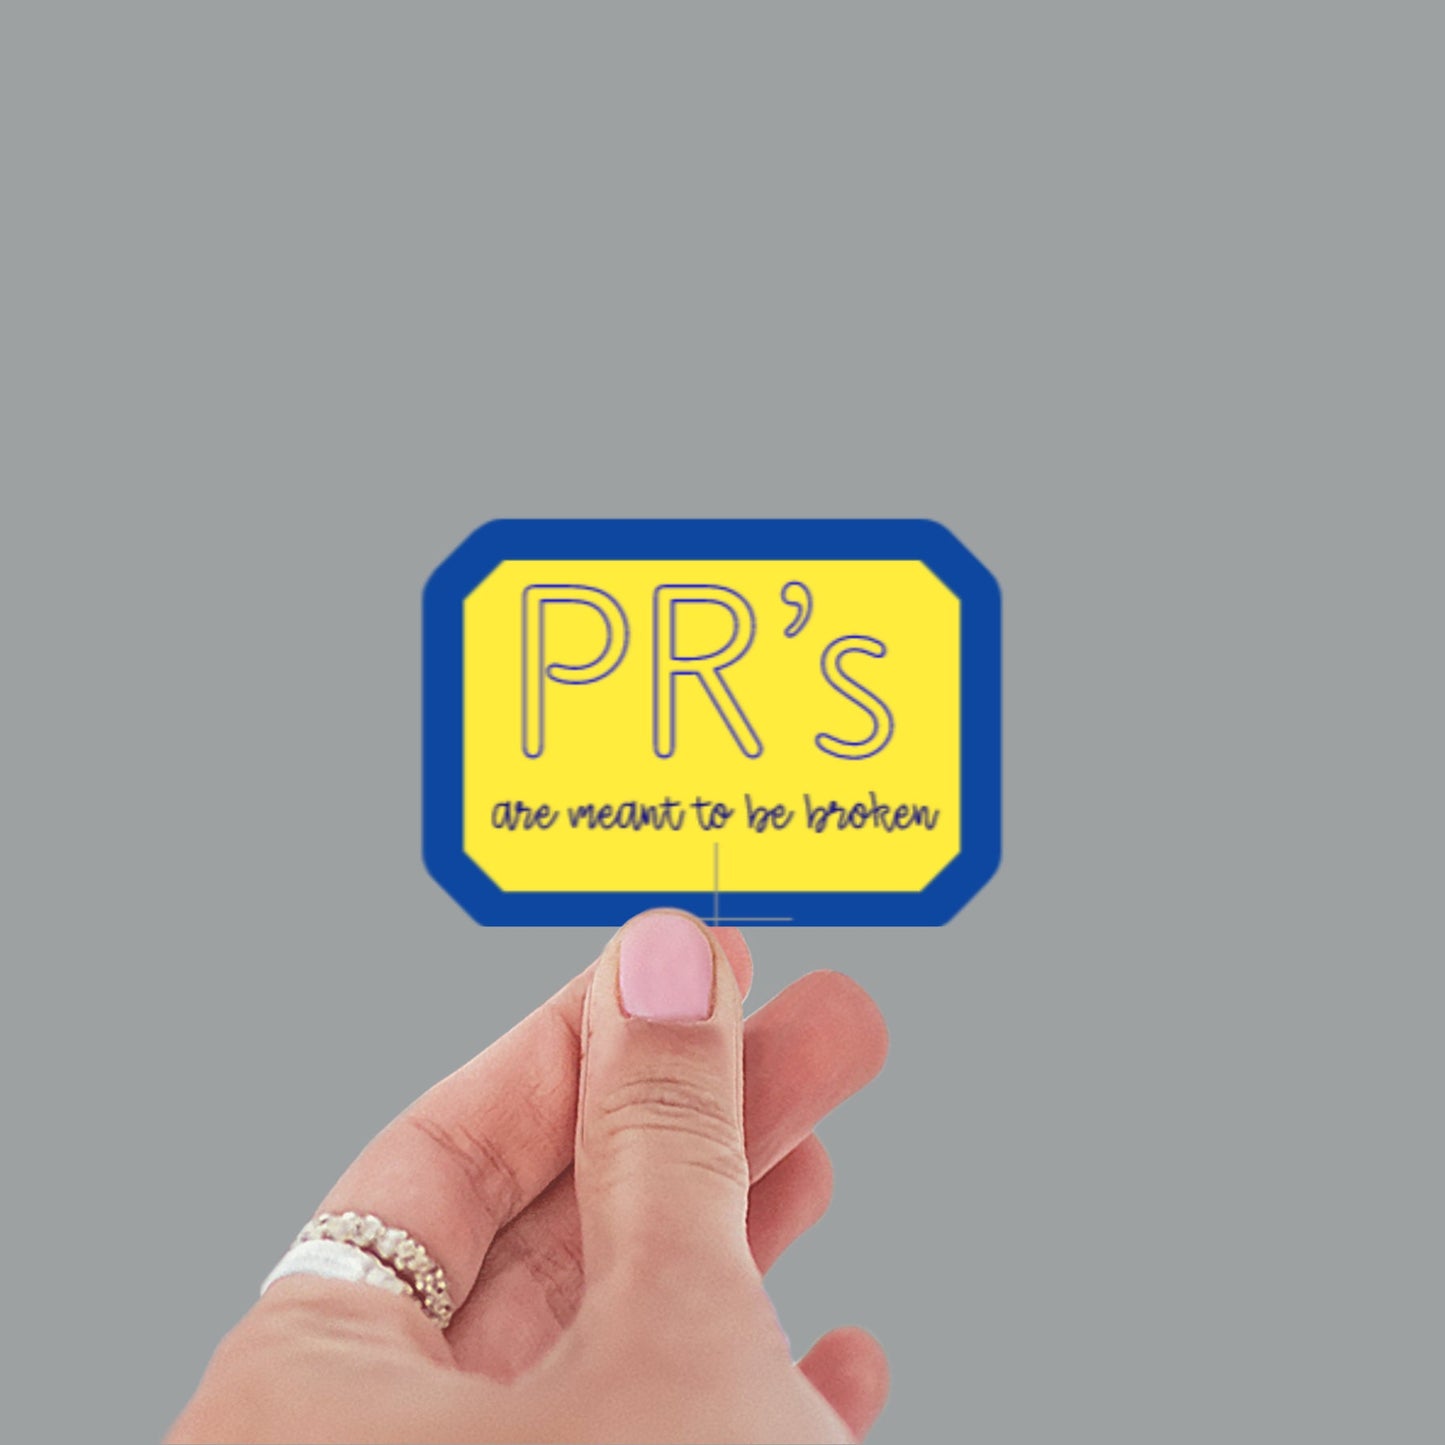 PRs are meant to be broken Sticker